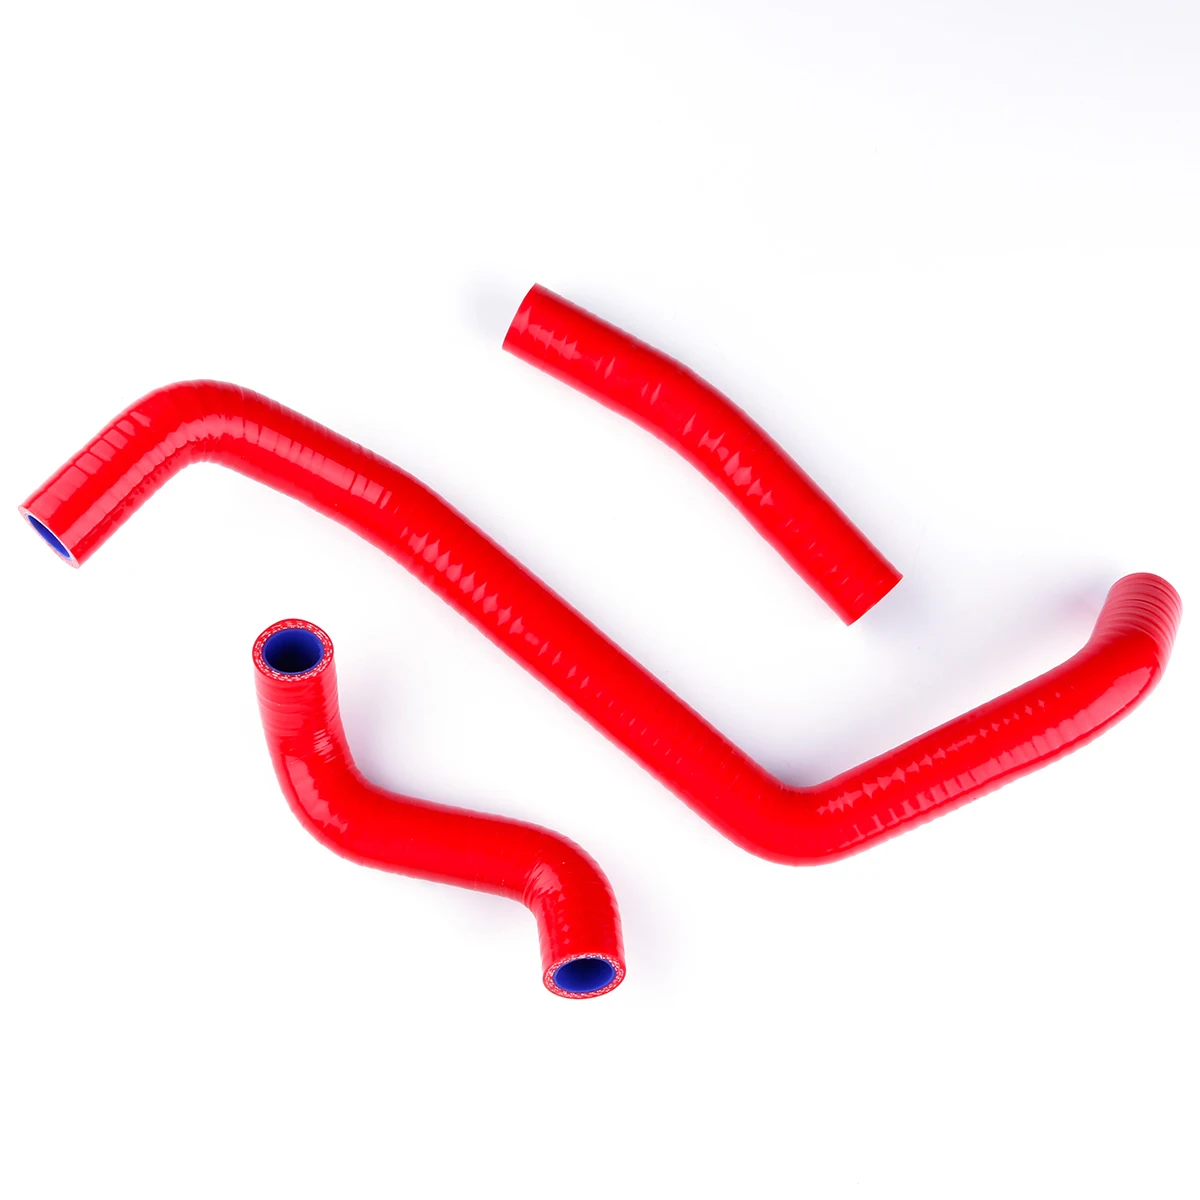 For Can-Am Bombardier DS 650 DS650 2000-2007 2002 2003 2004 2005 2006 ATV Silicone Radiator Hose Tube Pipe Kit 3Pcs